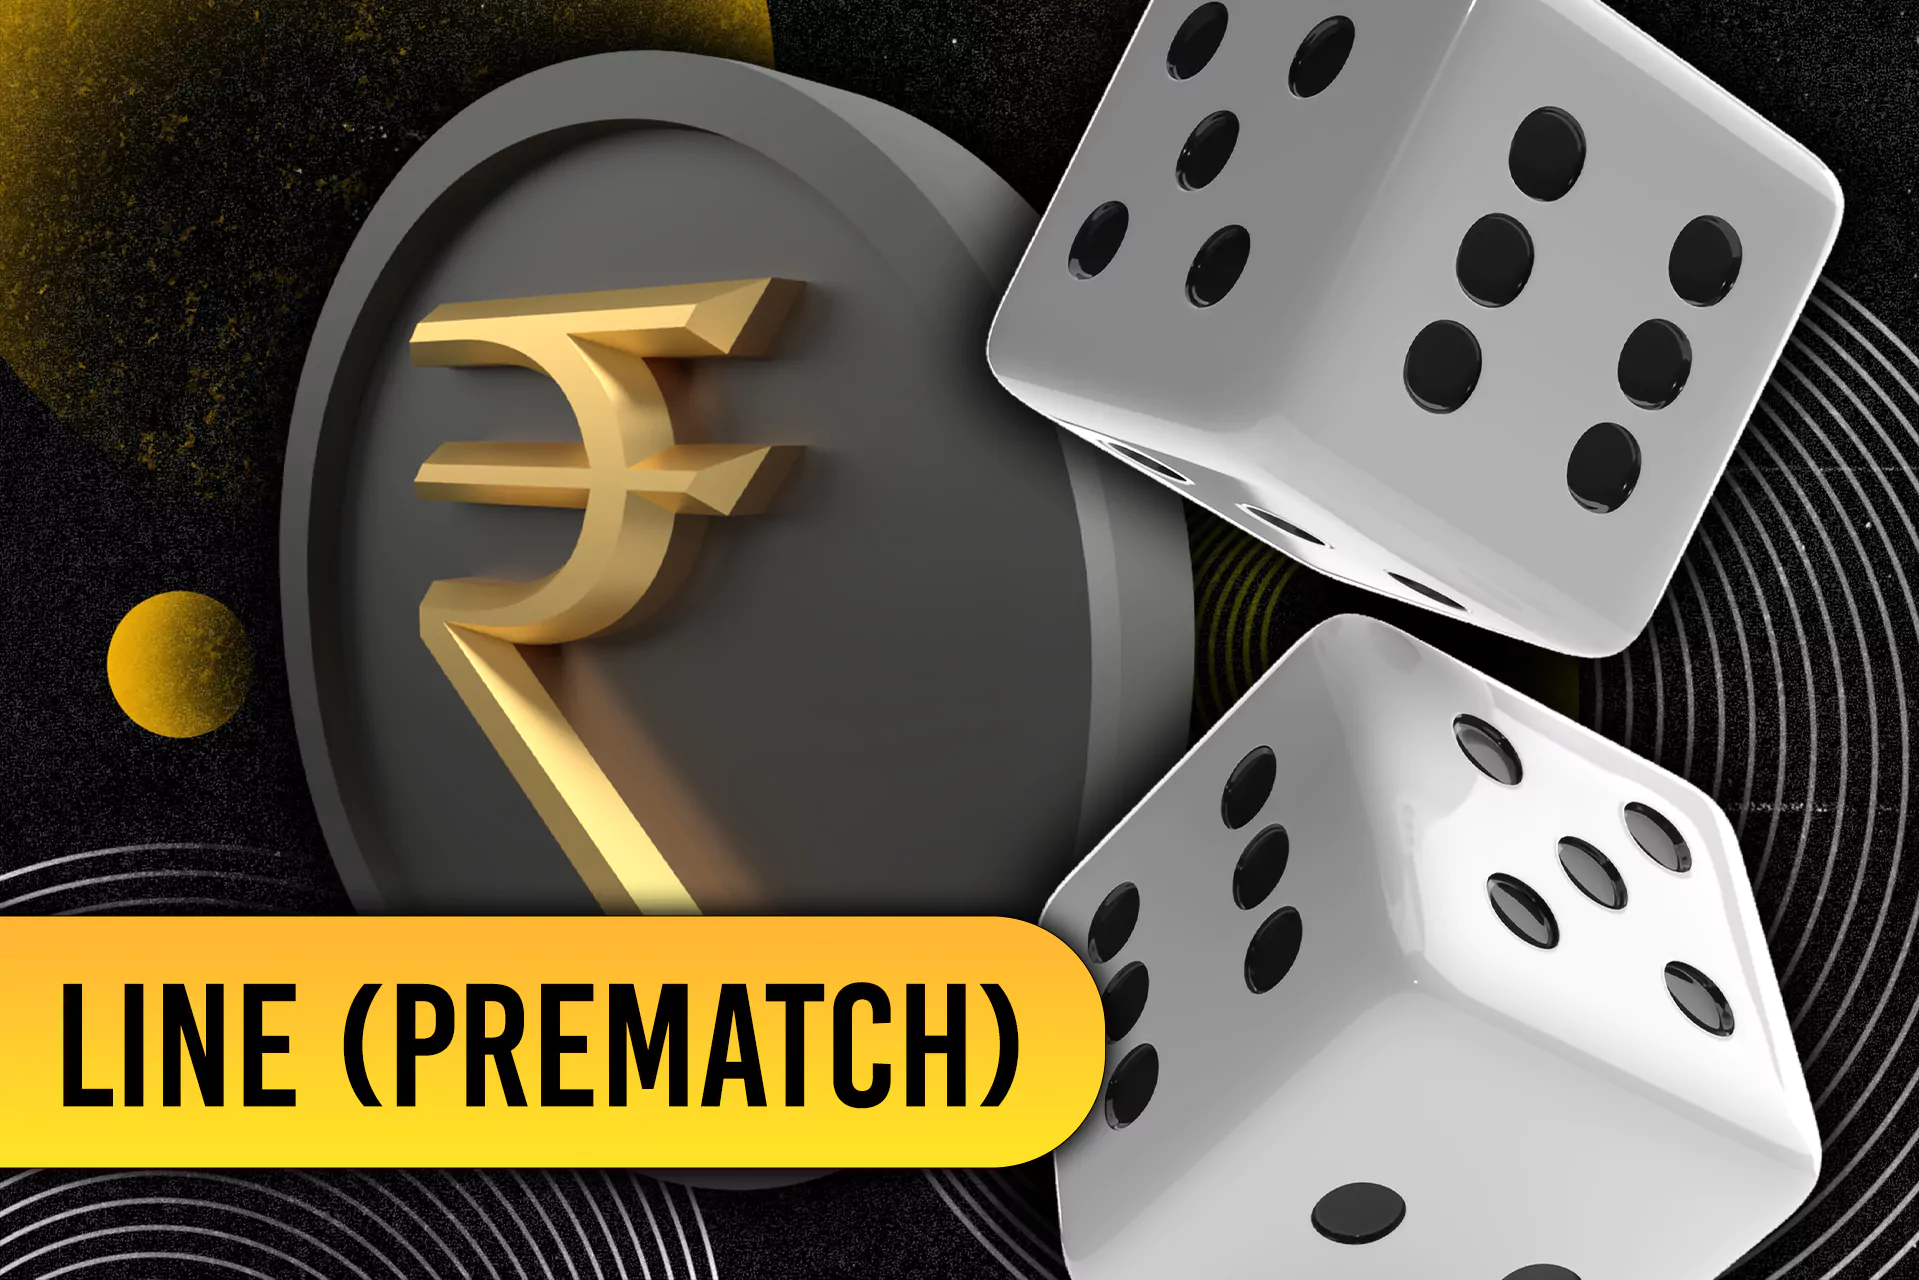 Usual prematch betting is also available at BetVisa.